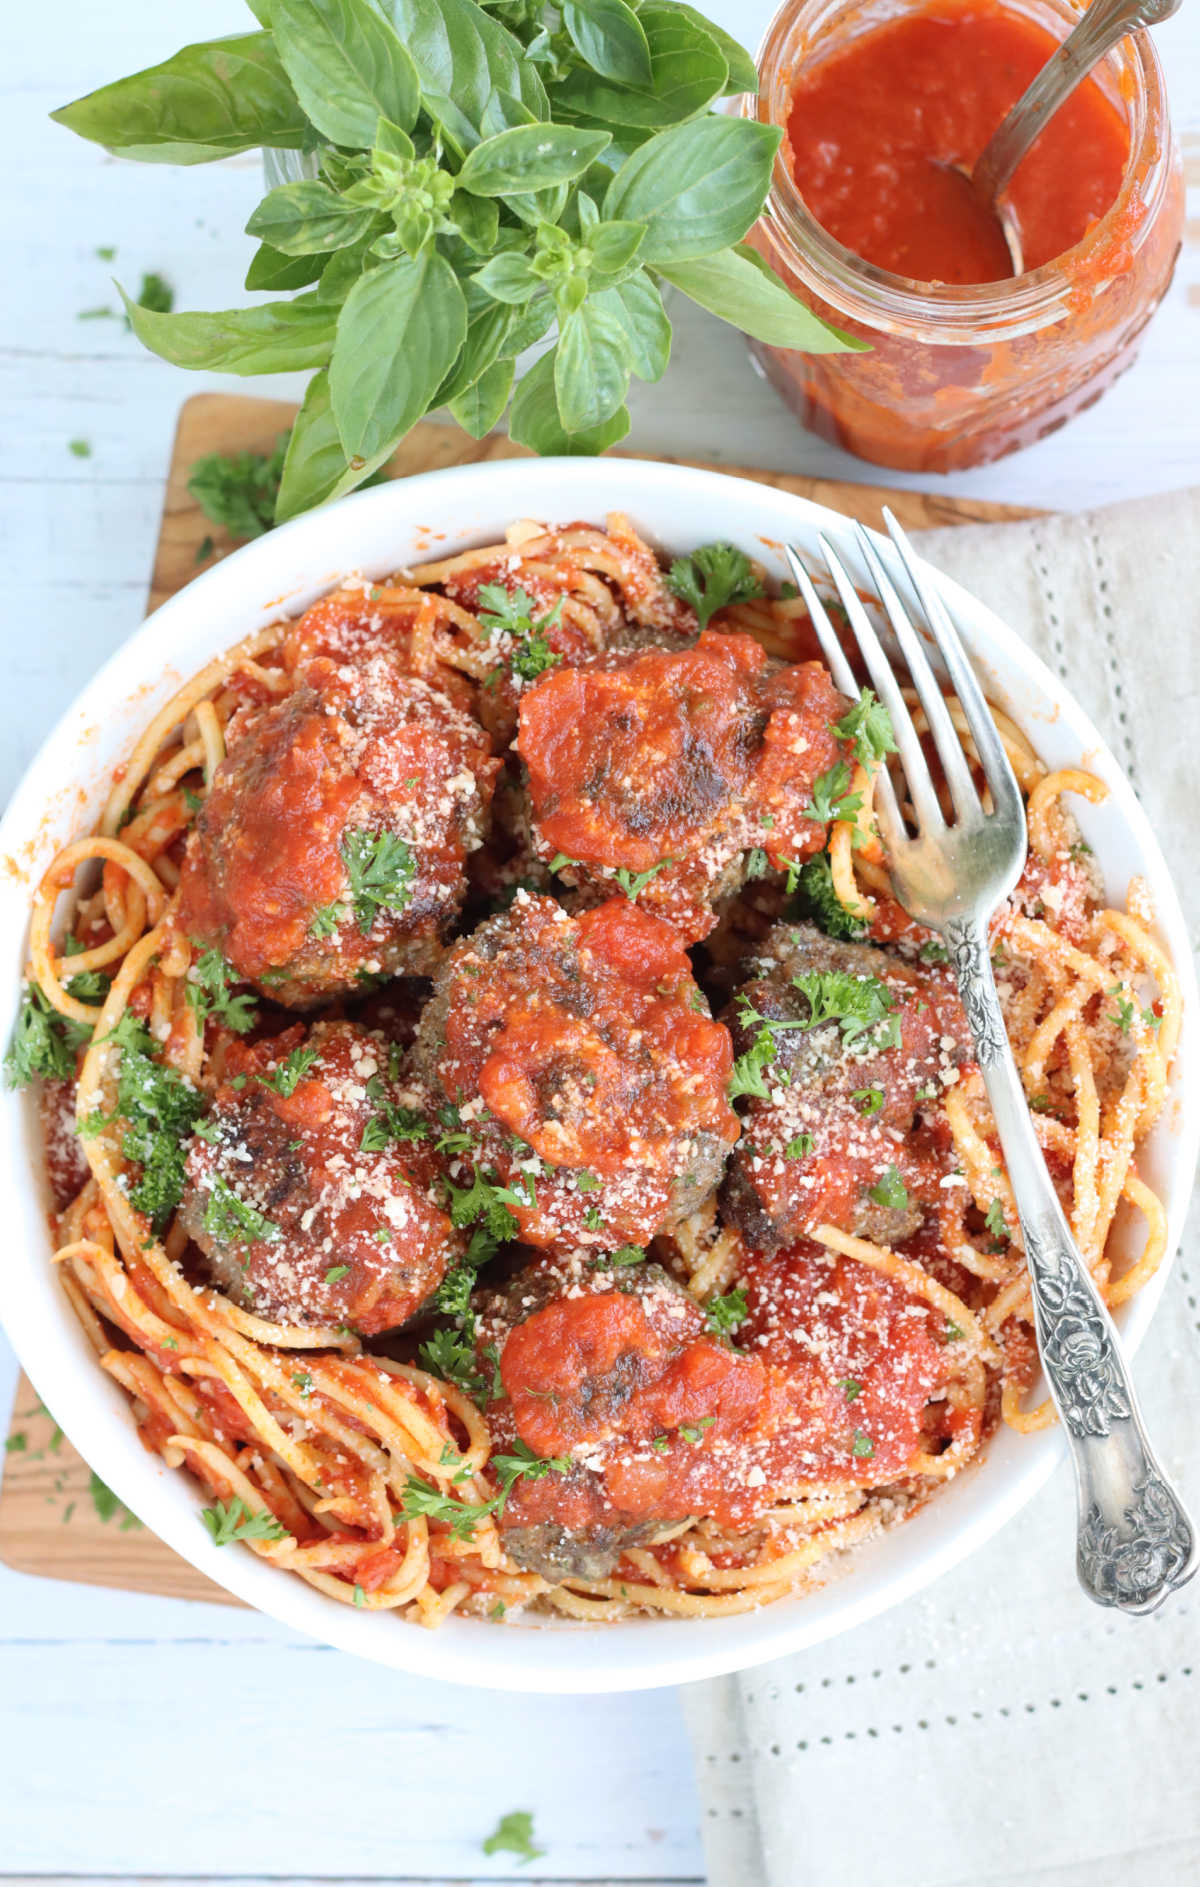 Spaghetti with meatballs in white bowl, fork to right, on wooden cutting board.